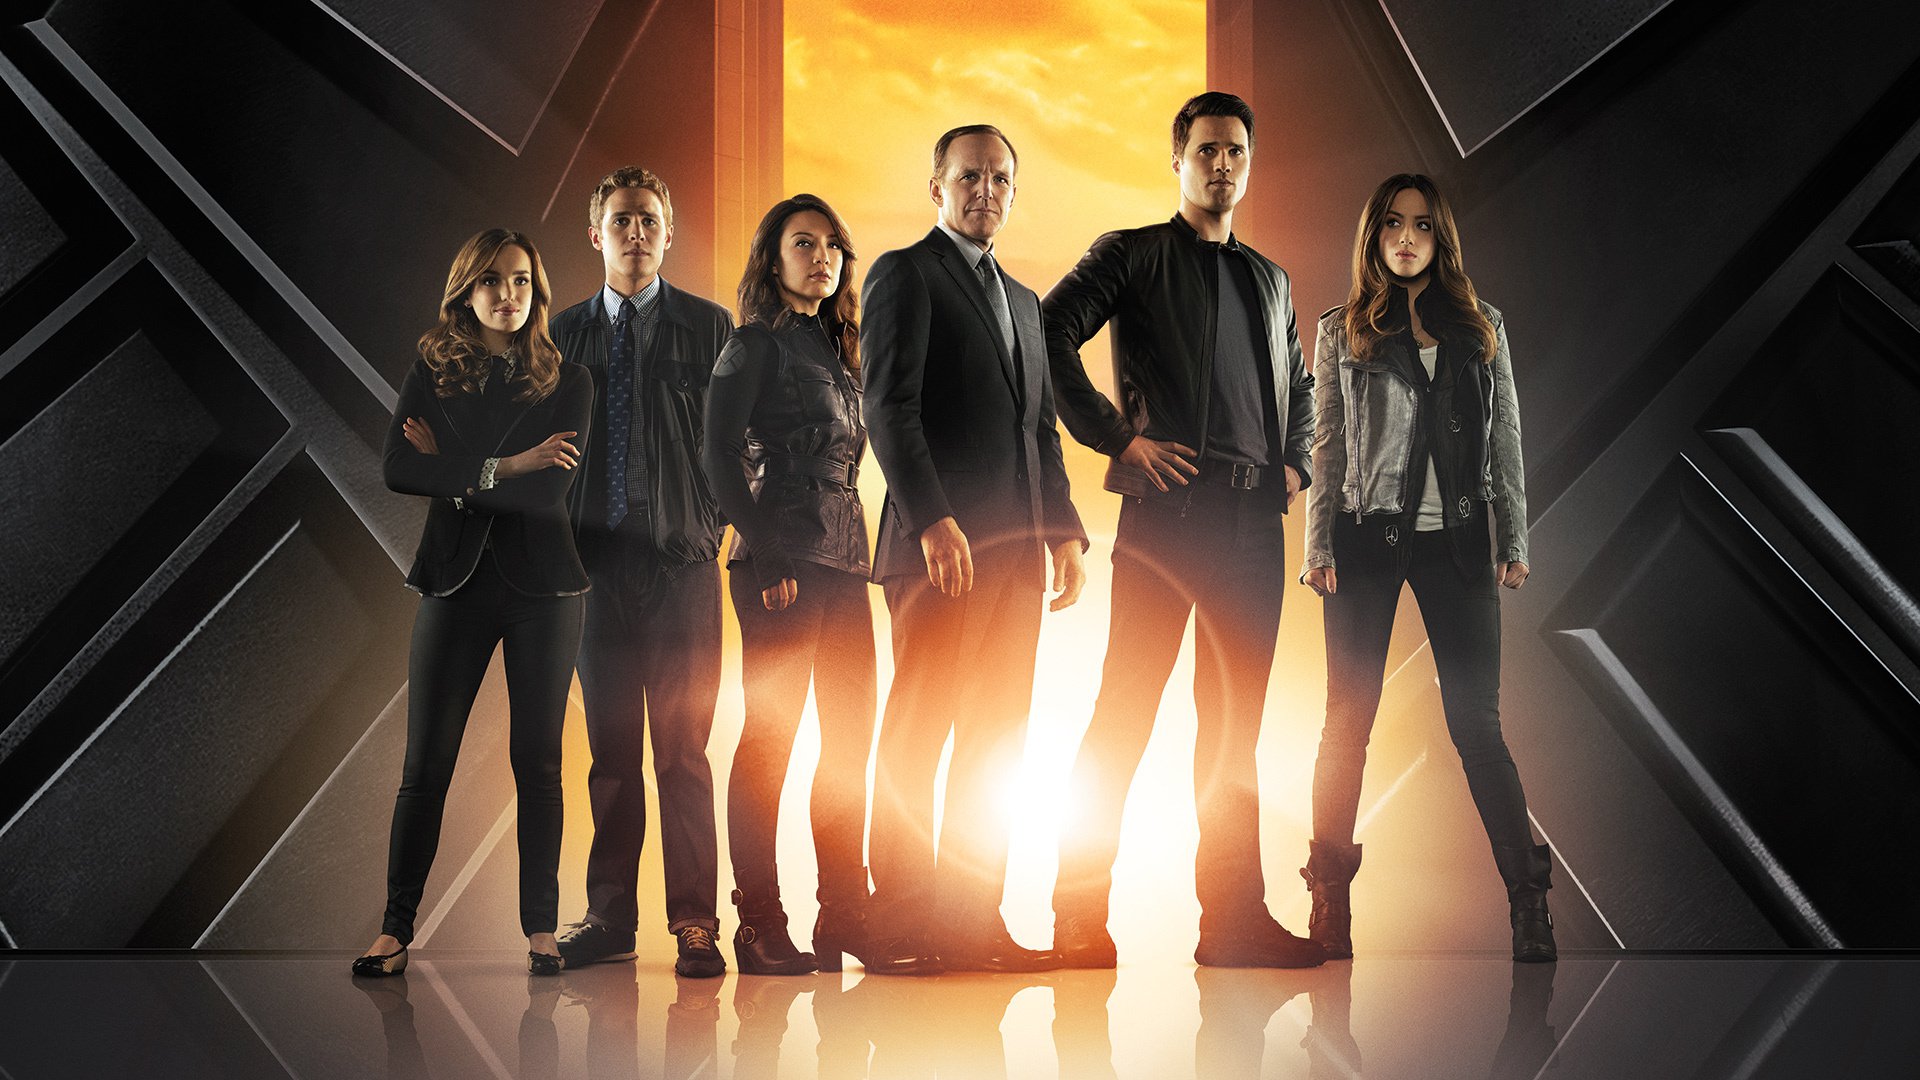 Agents of SHIELD  High Definition High Resolution HD Wallpapers   High Definition High Resolution HD Wallpapers